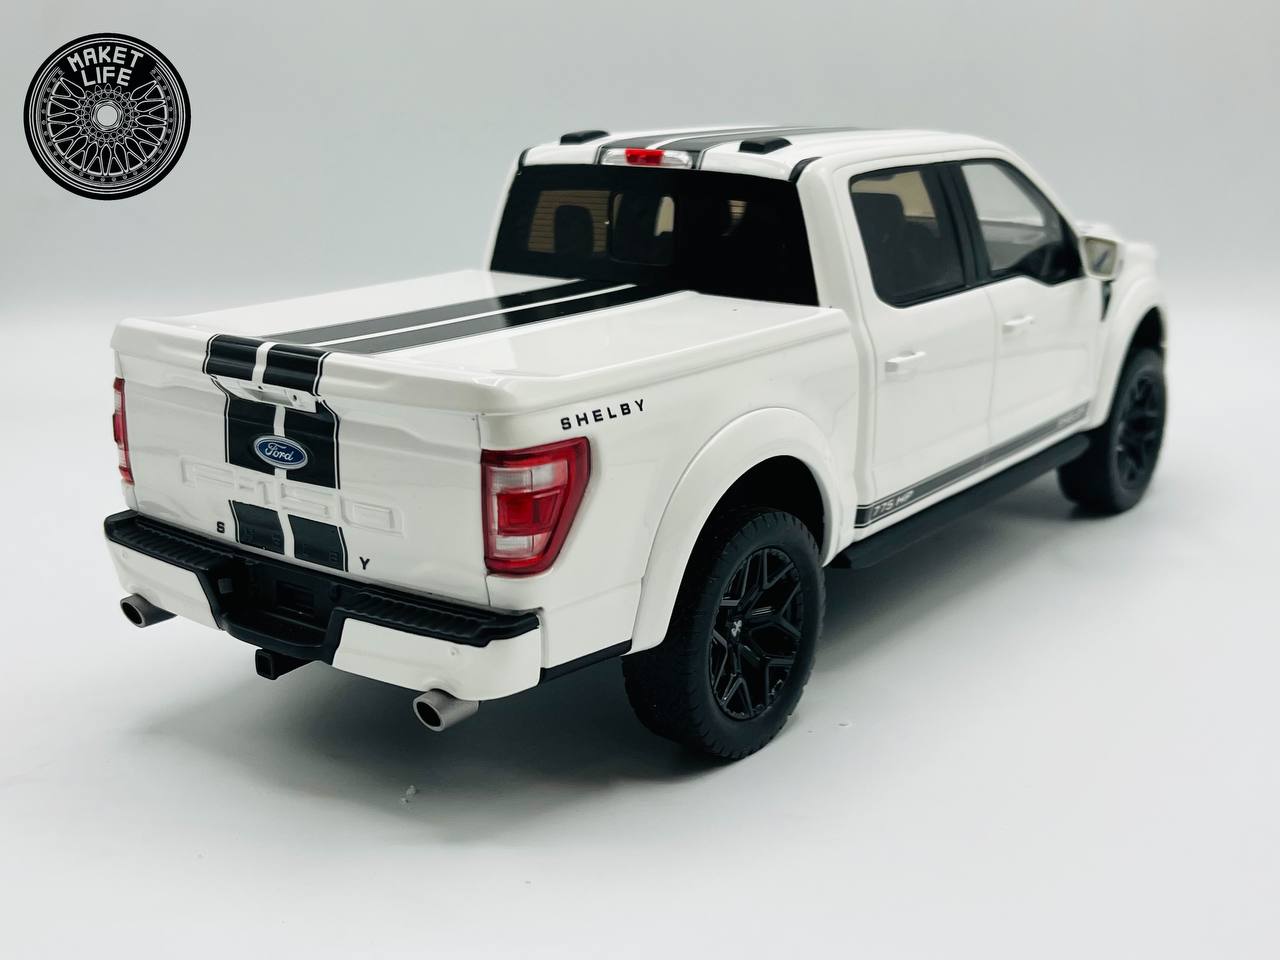  Shelby F-150